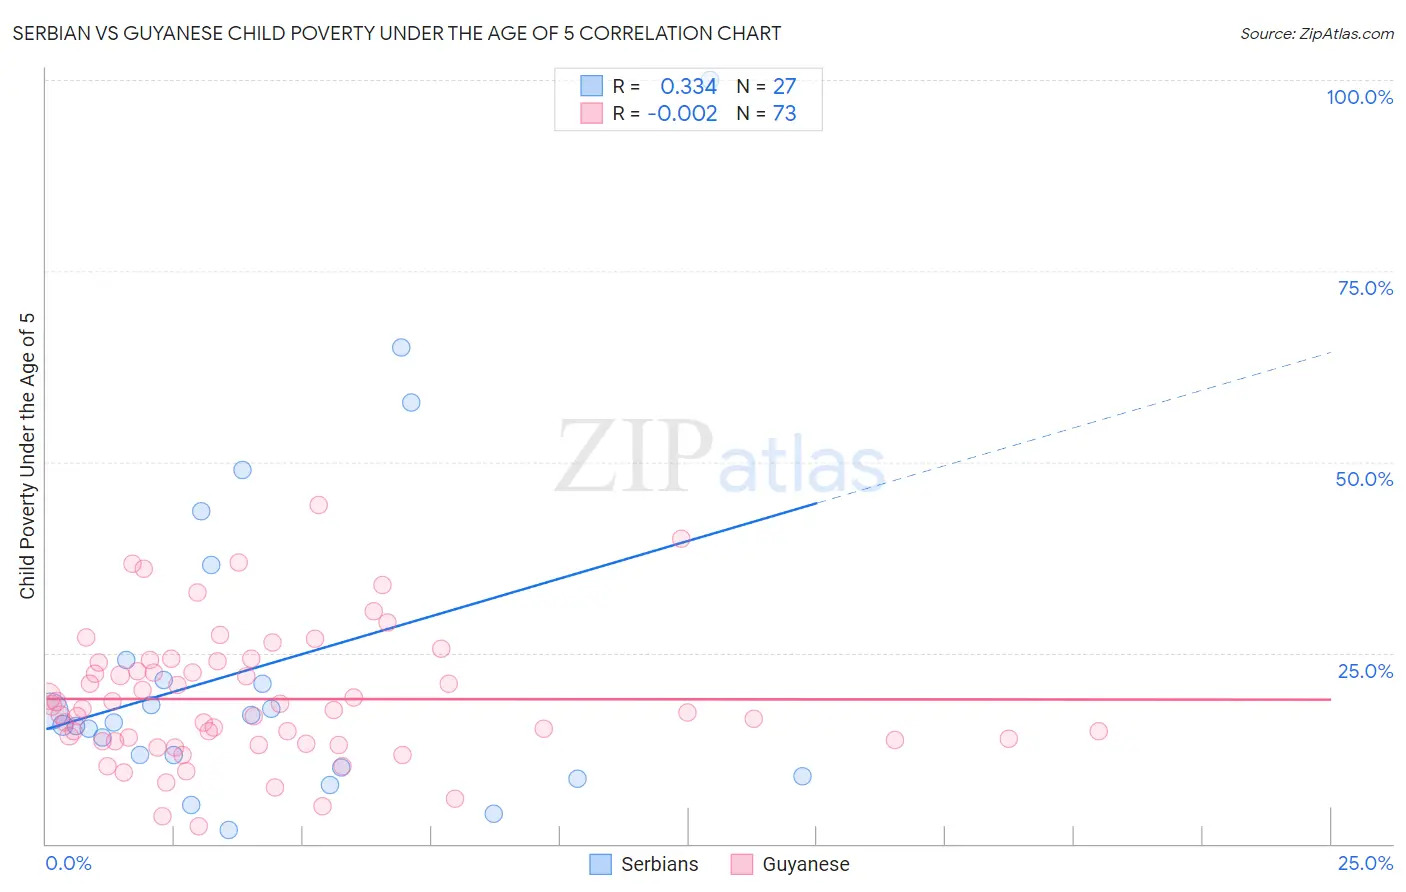 Serbian vs Guyanese Child Poverty Under the Age of 5